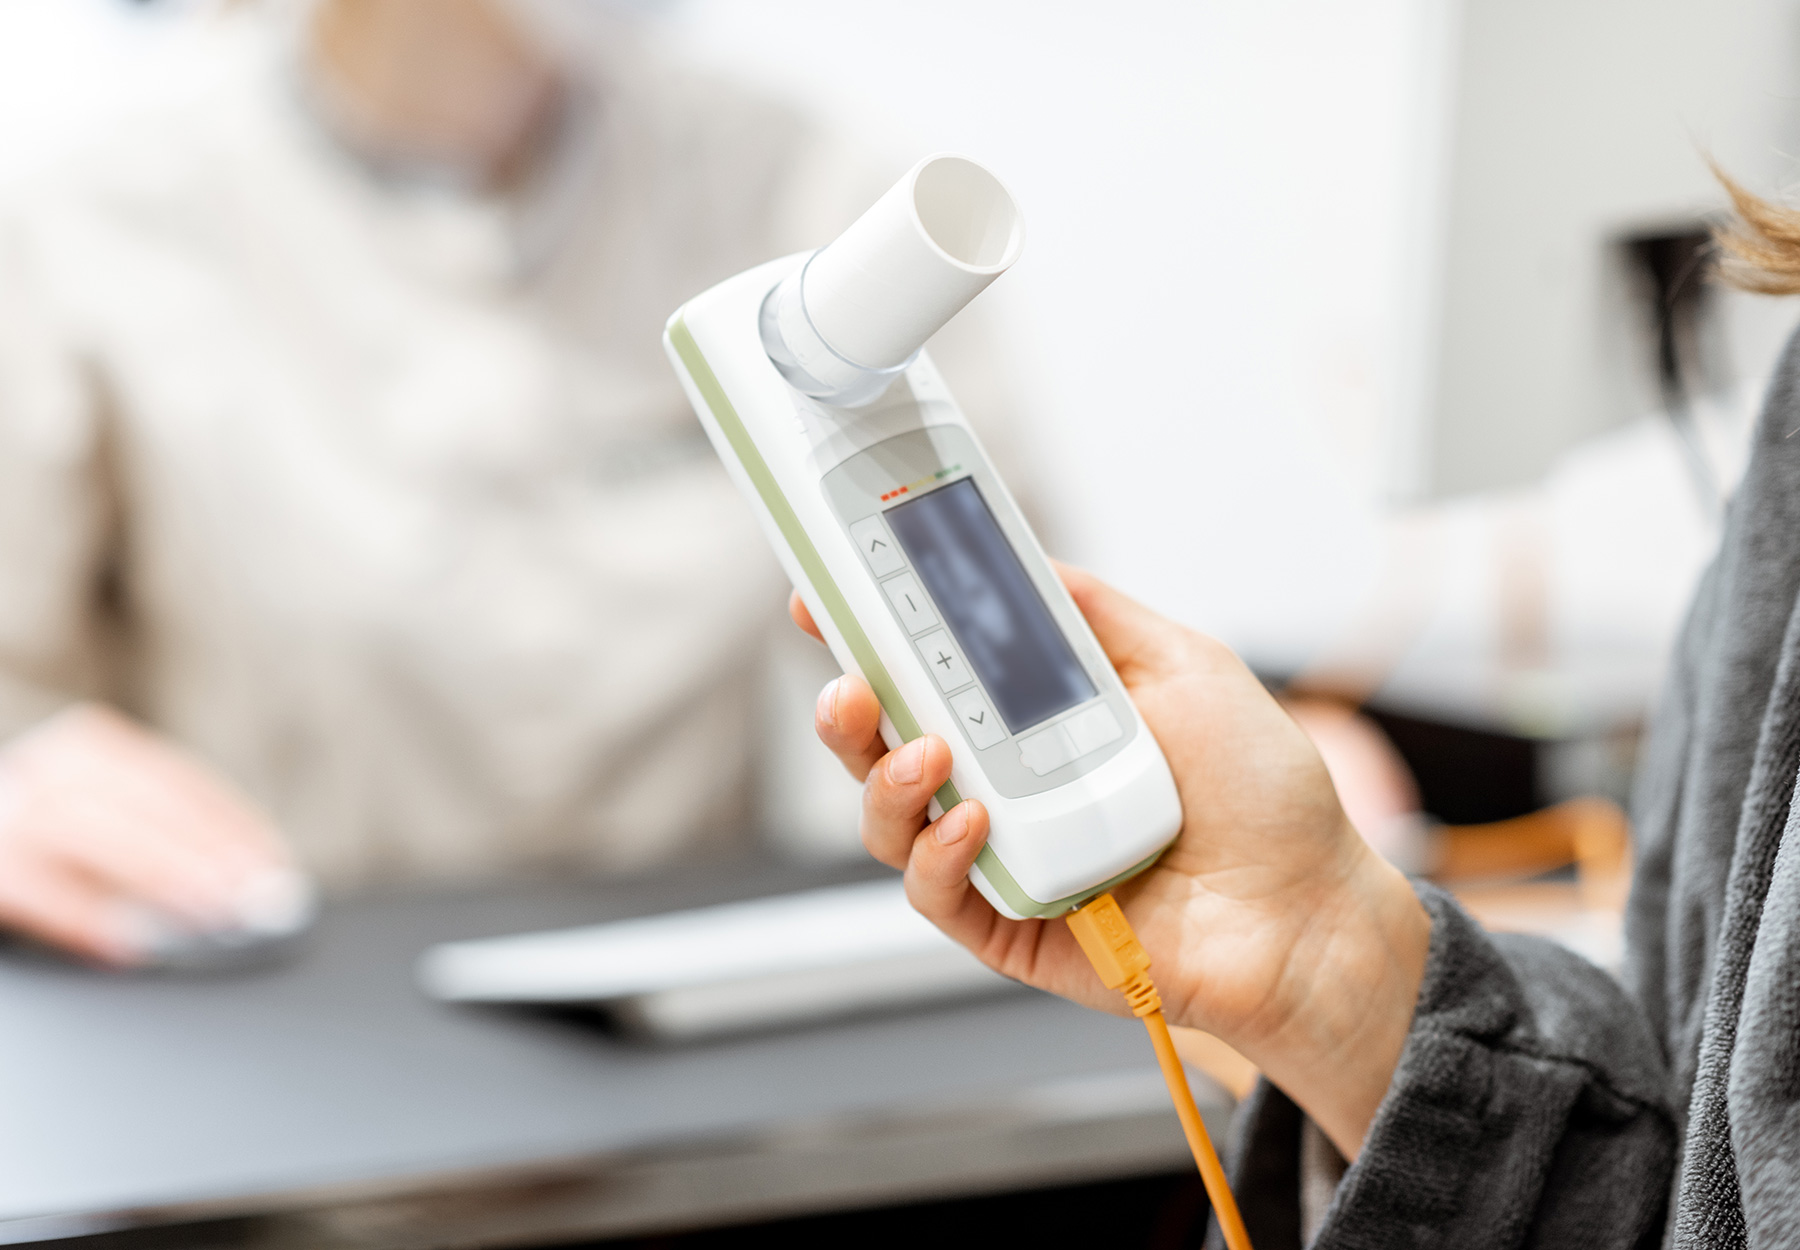 A closeup of a patient holding a spirometer device for measuring lung function.